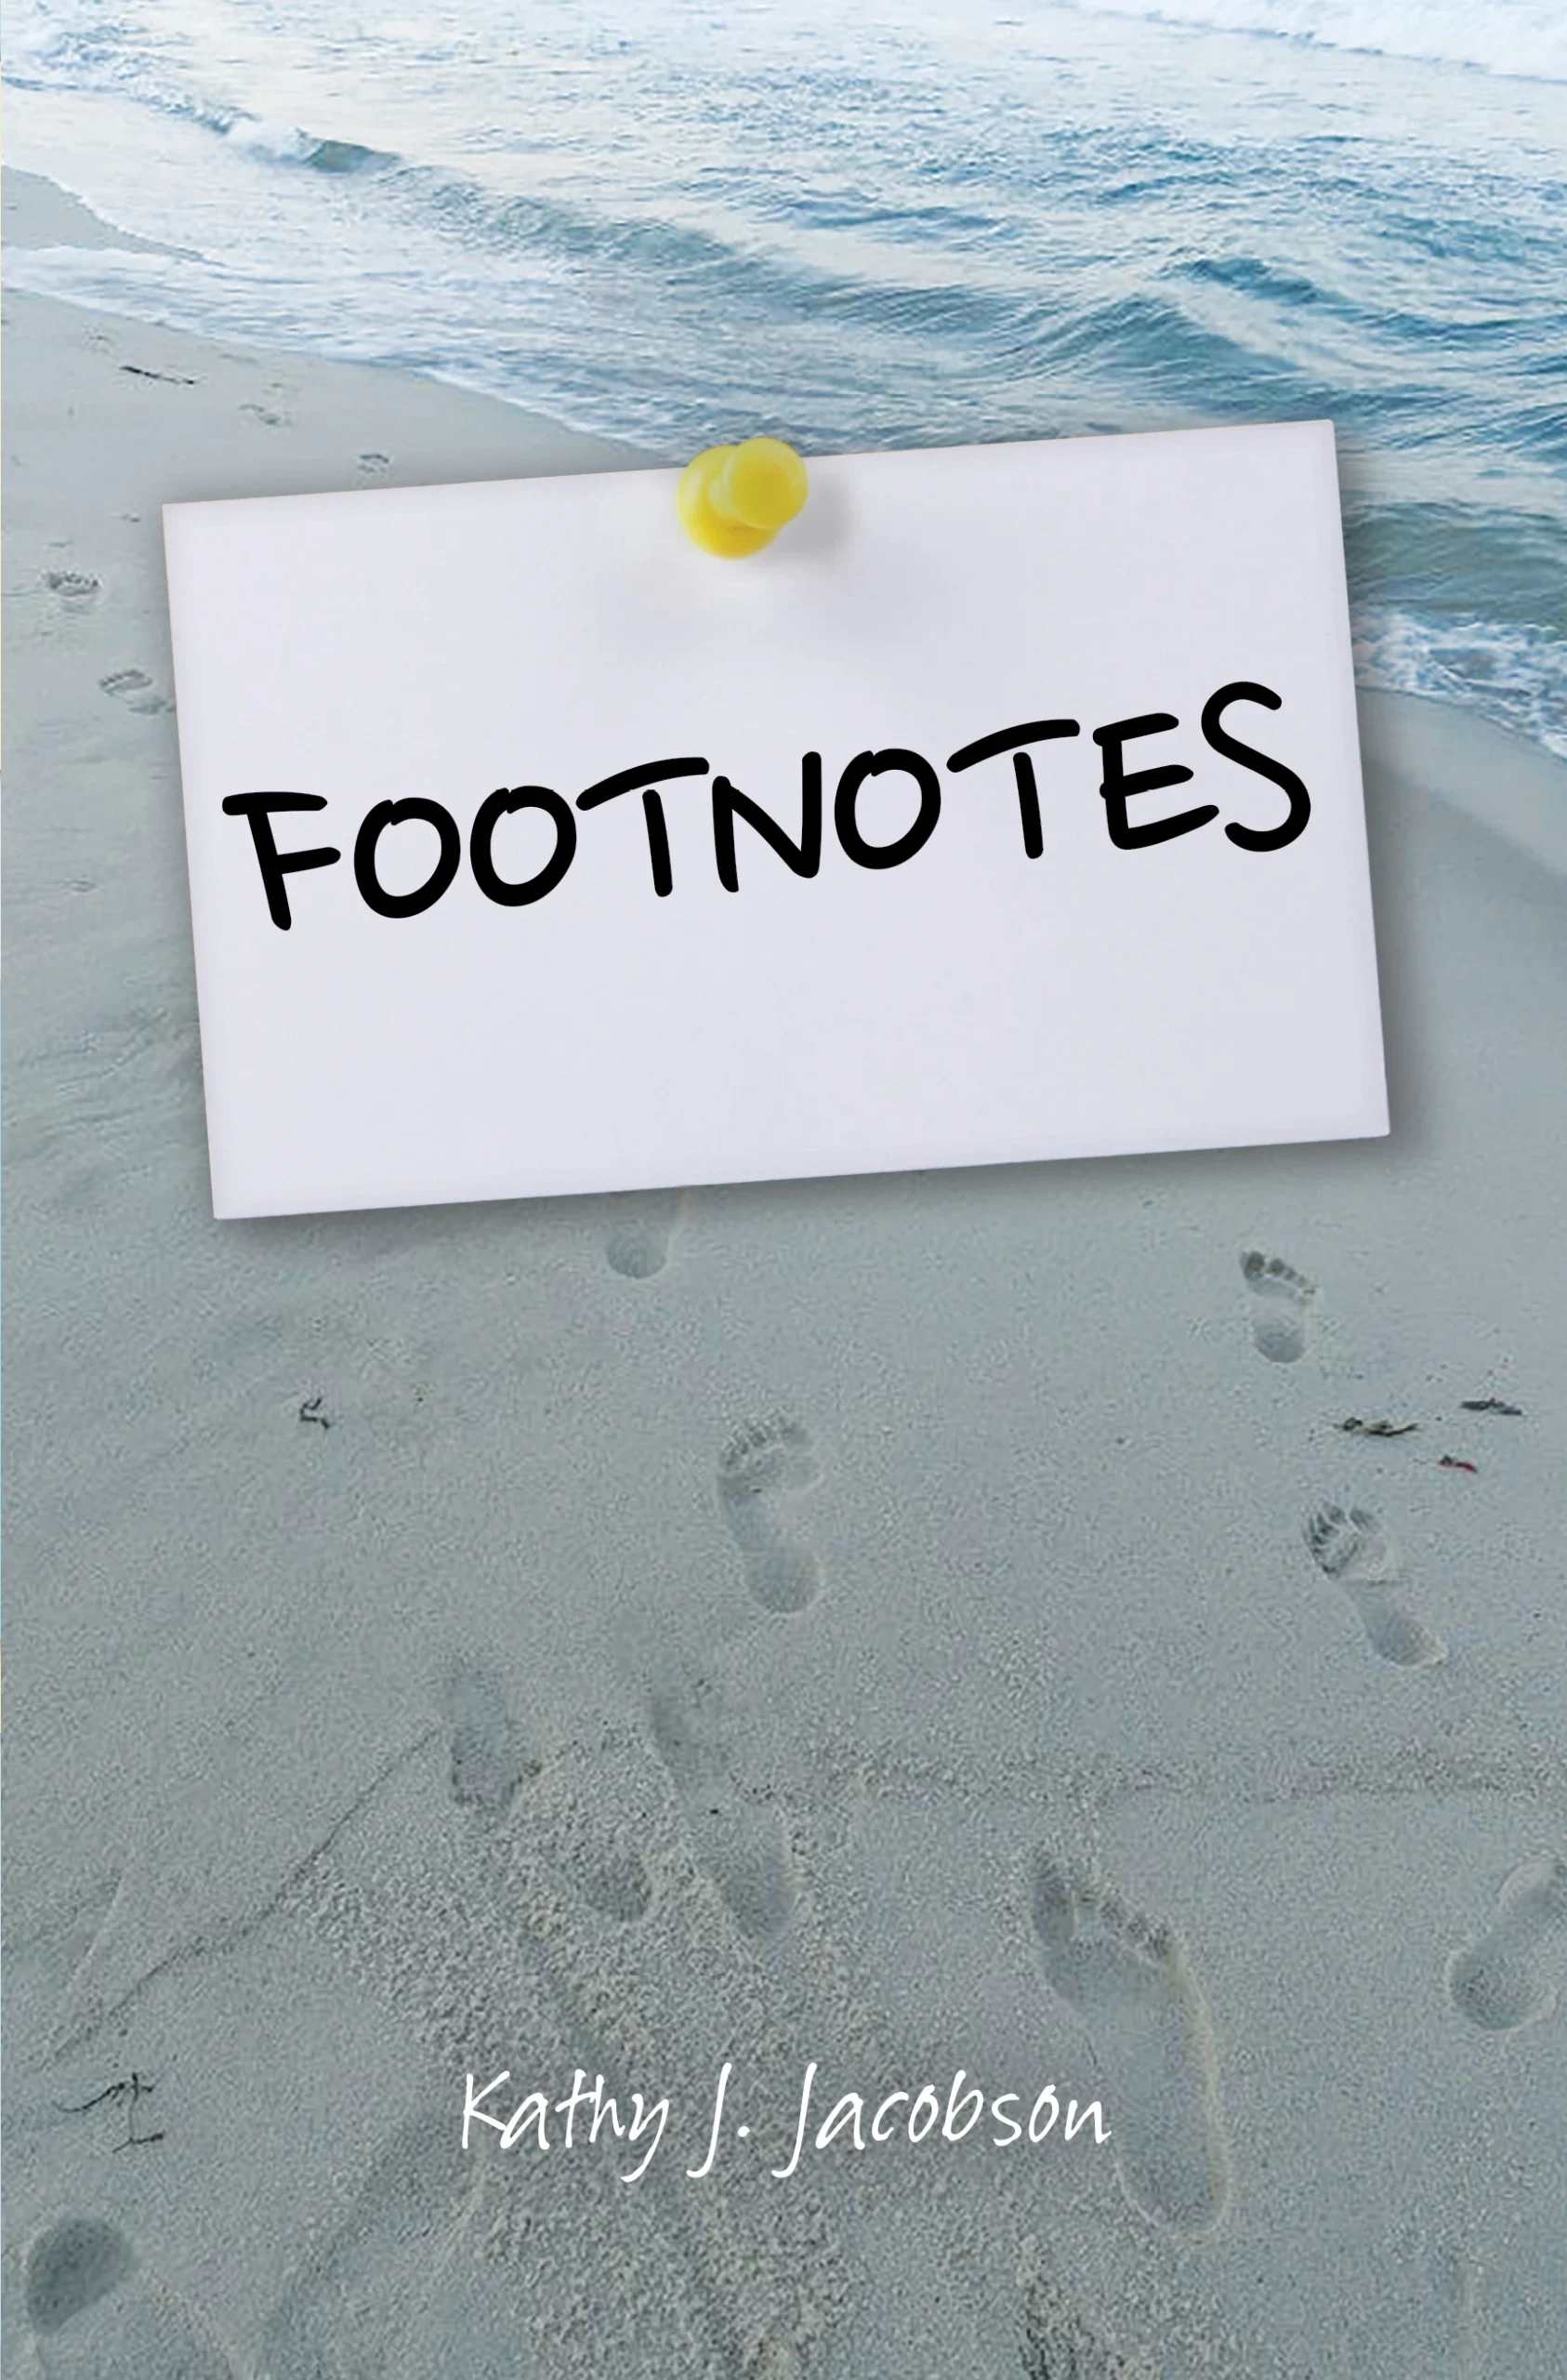 footnotes book cover